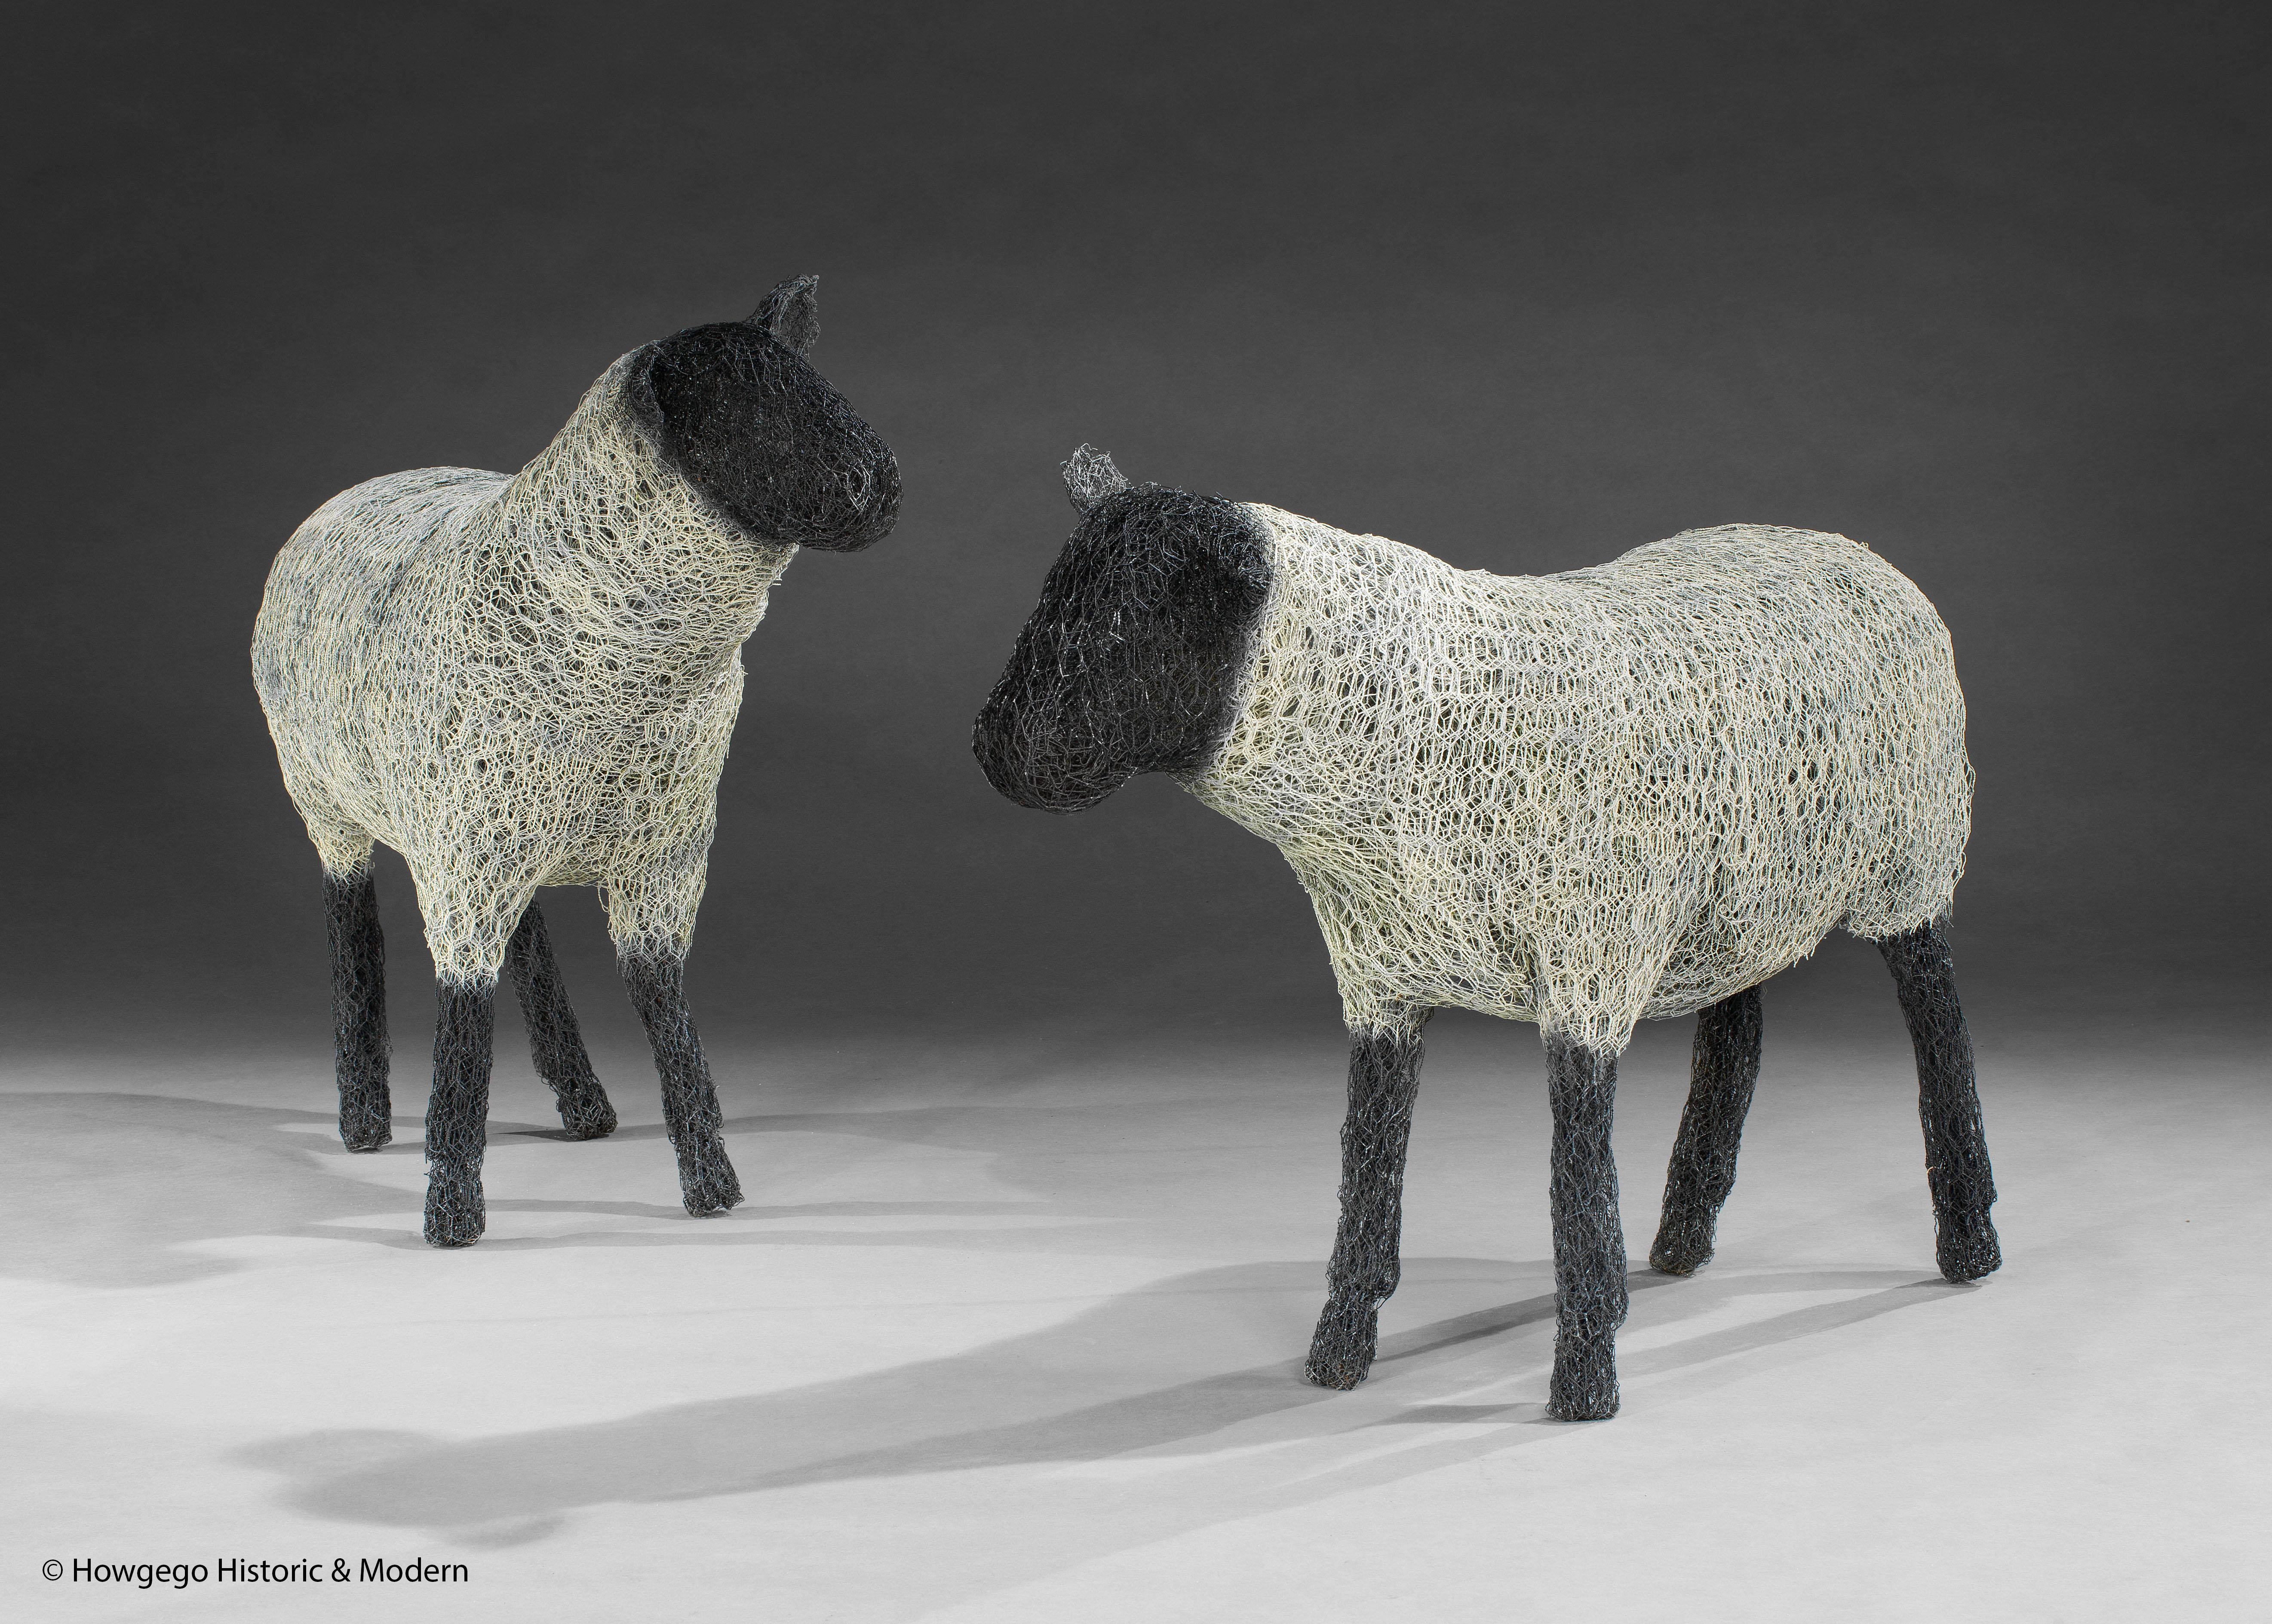 A Pair of Contemporary, Folk Art, Life-Size, Sheep, Wirework, Garden Sculptures

Hand-sculpted using multiple layers of painted galvanized wire in white and black.  Each sculpture is unique.  These sheep are very realistic and often mistaken for the